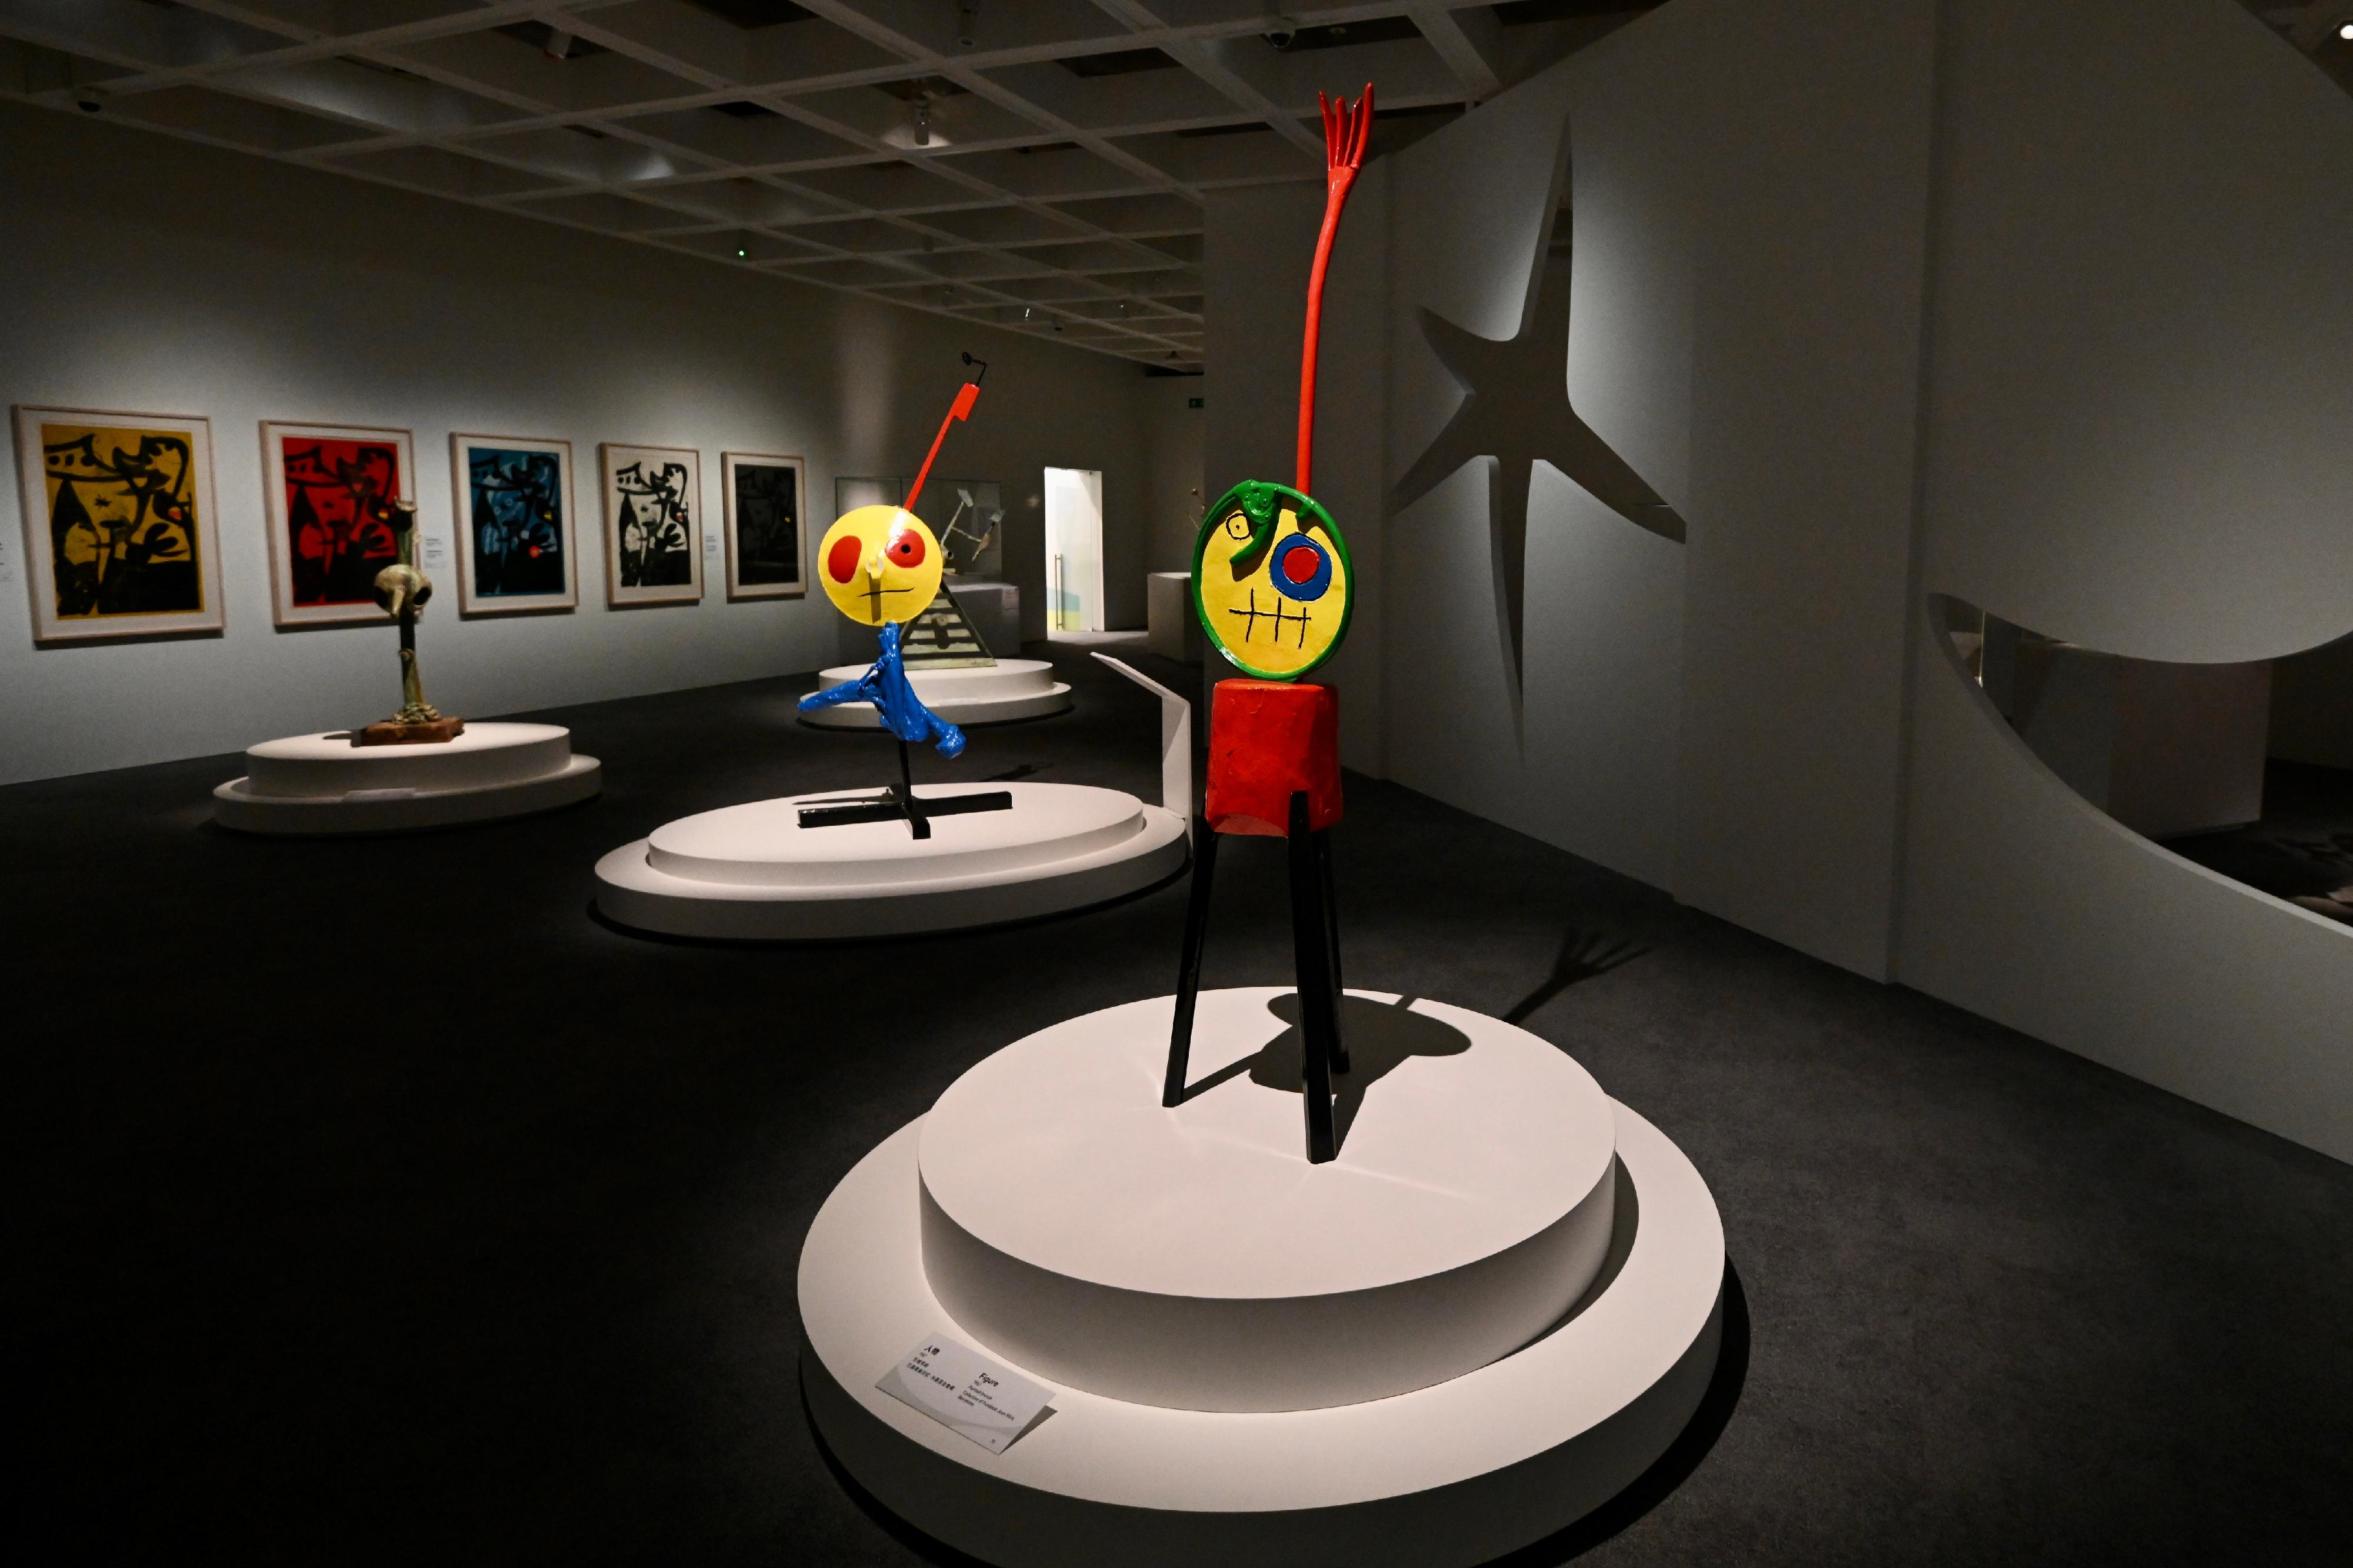 "The Hong Kong Jockey Club Series: Joan Miró — The Poetry of Everyday Life" exhibition will be held at the Hong Kong Museum of Art starting from tomorrow (March 3). Picture shows sculpture works created with daily objects by Miró.